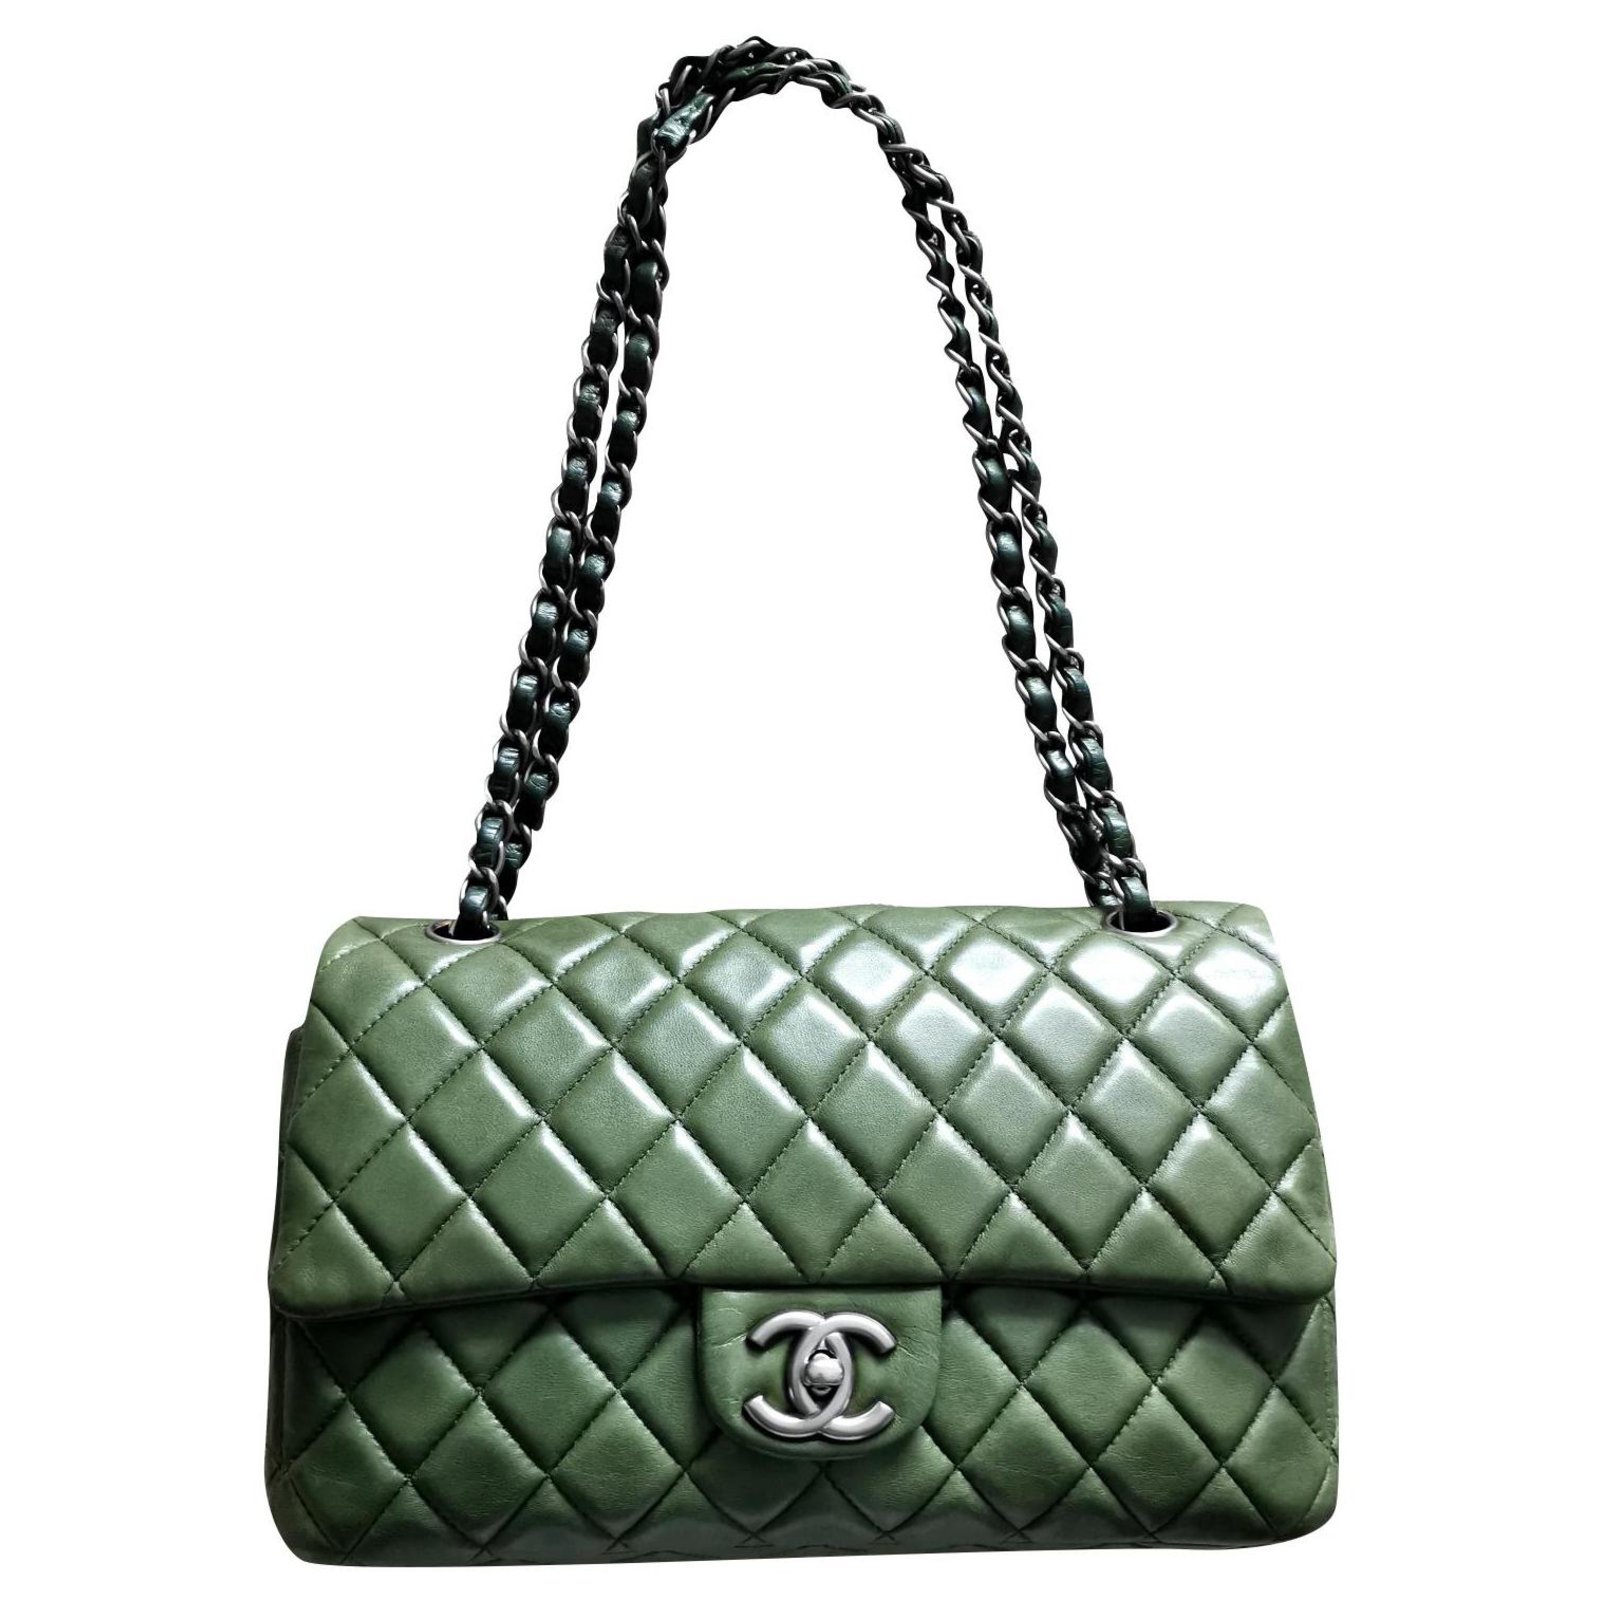 Chanel medium Timeless classic lined flap bag Dark green Leather